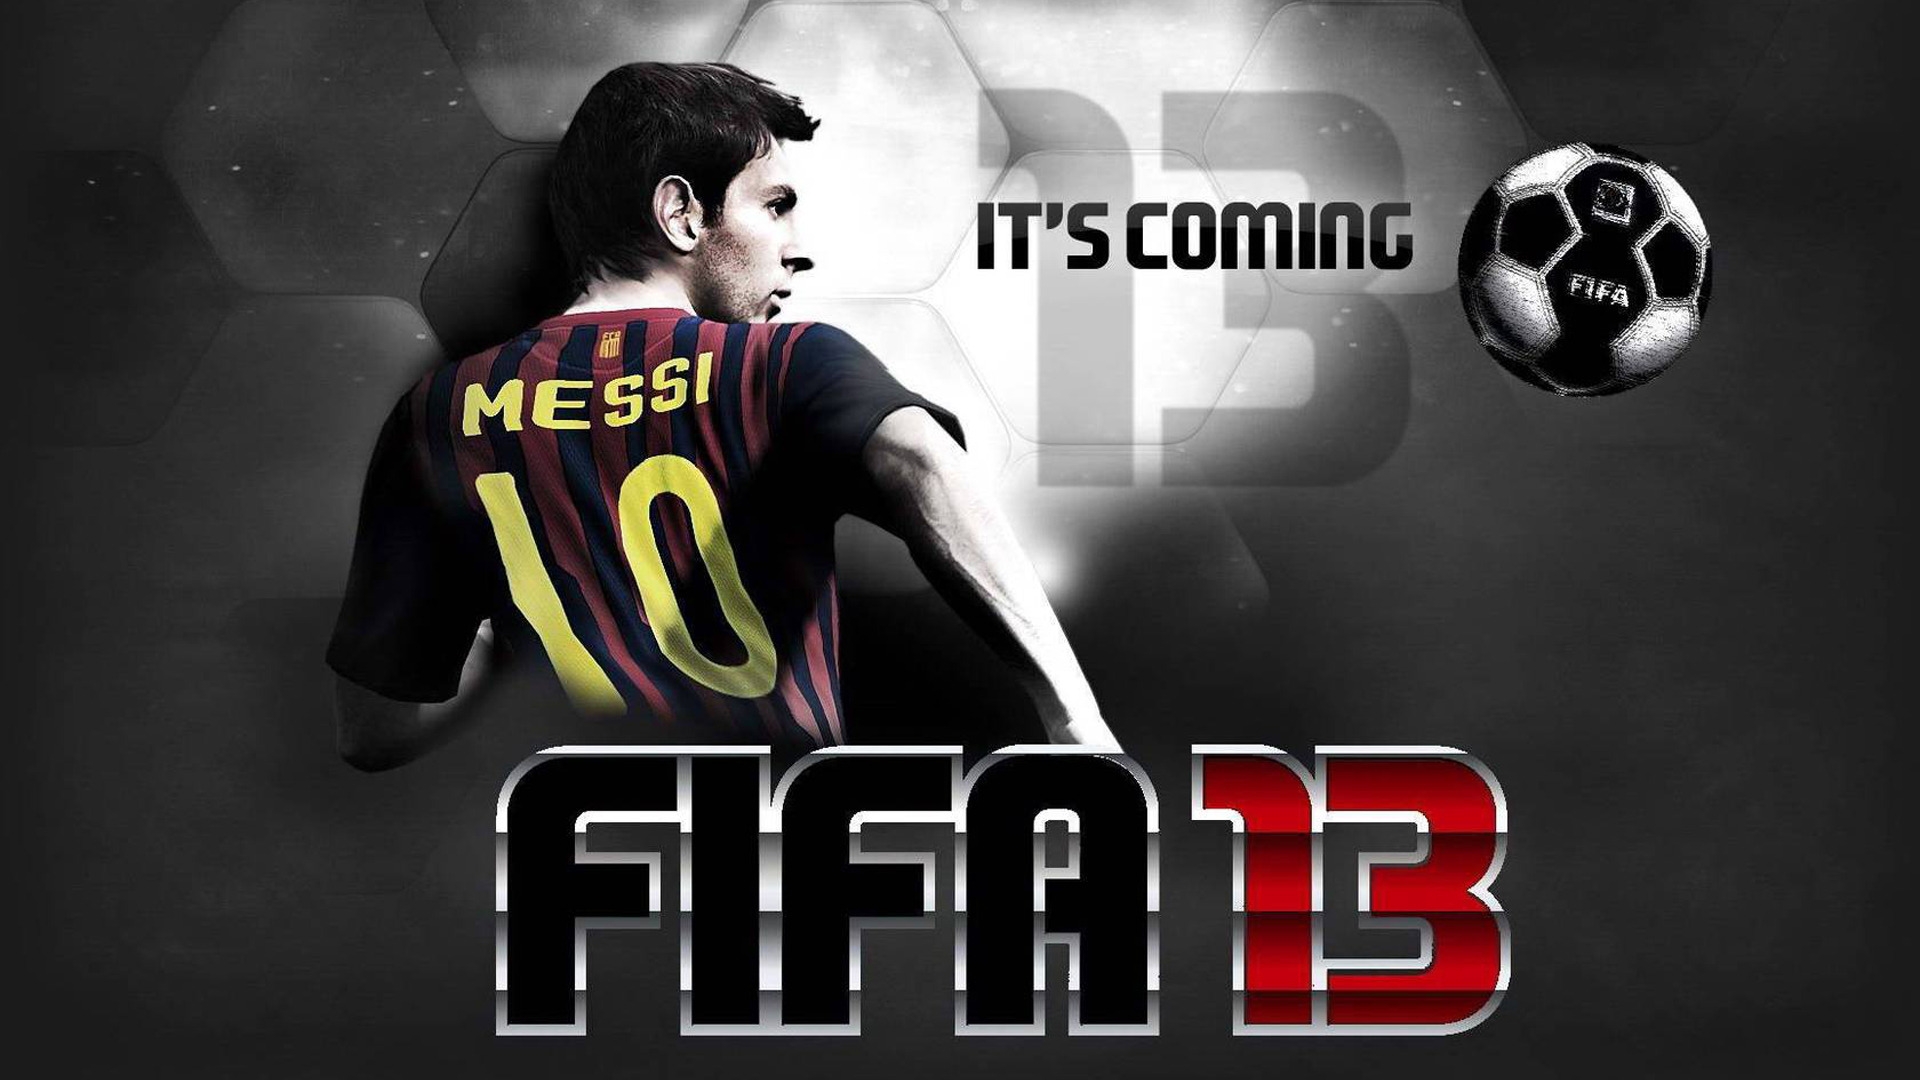 FIFA 13 for 1920 x 1080 HDTV 1080p resolution